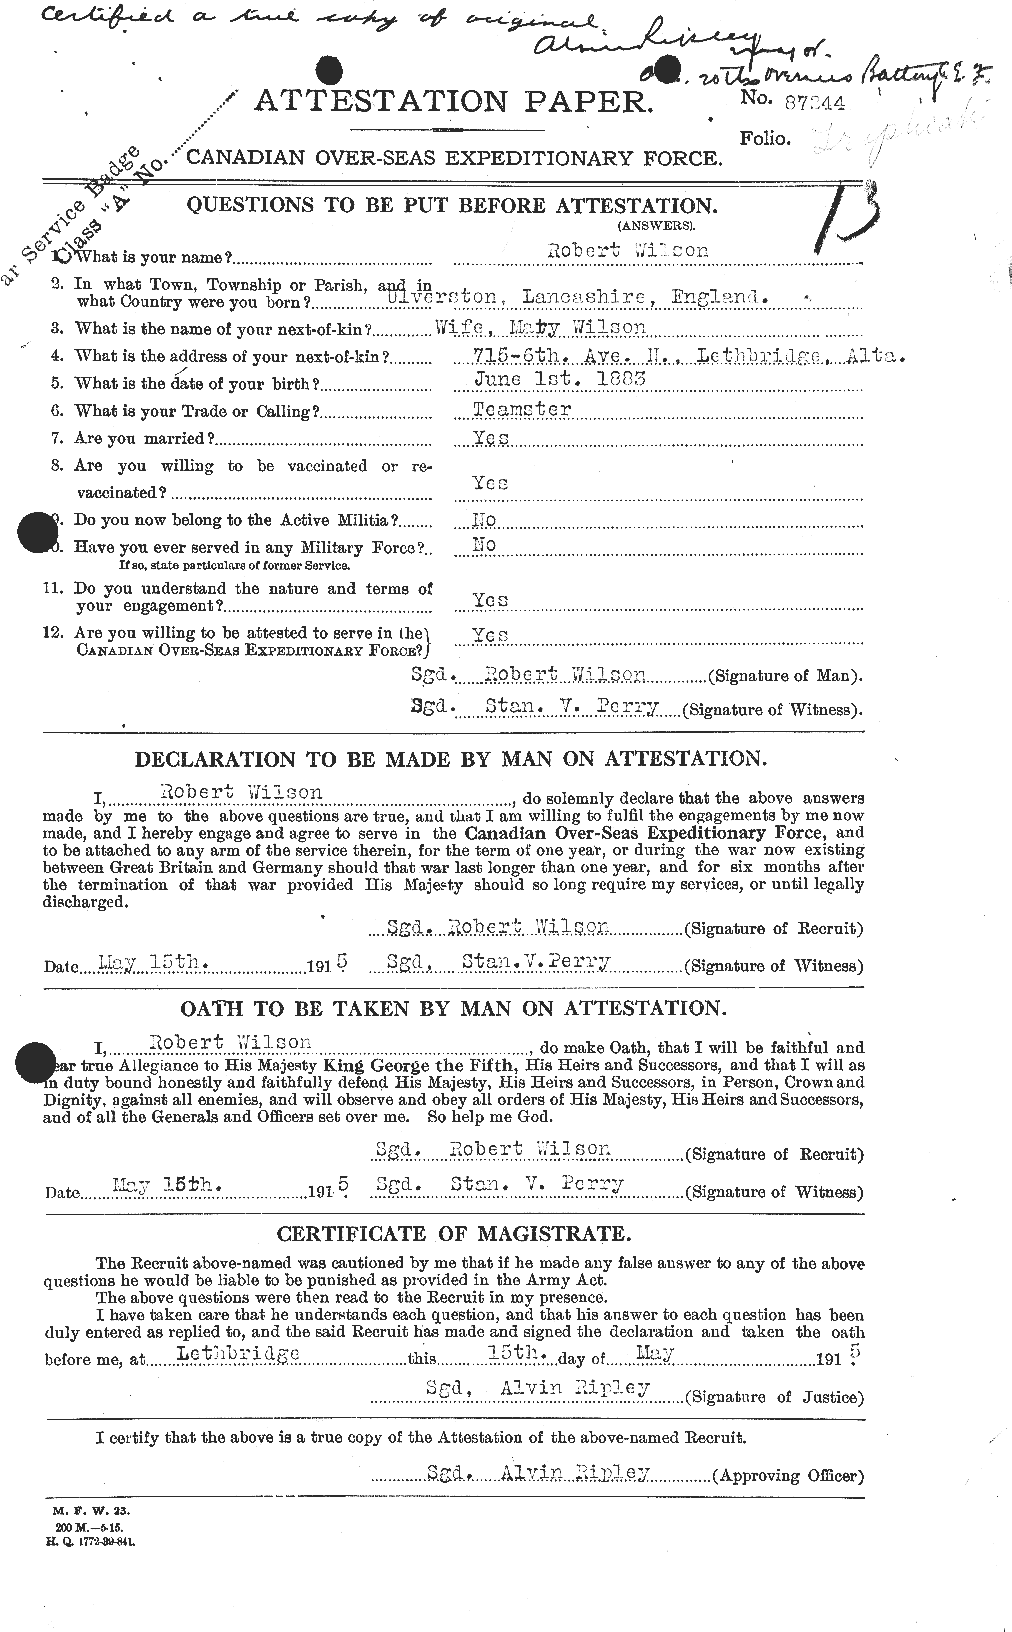 Personnel Records of the First World War - CEF 680926a